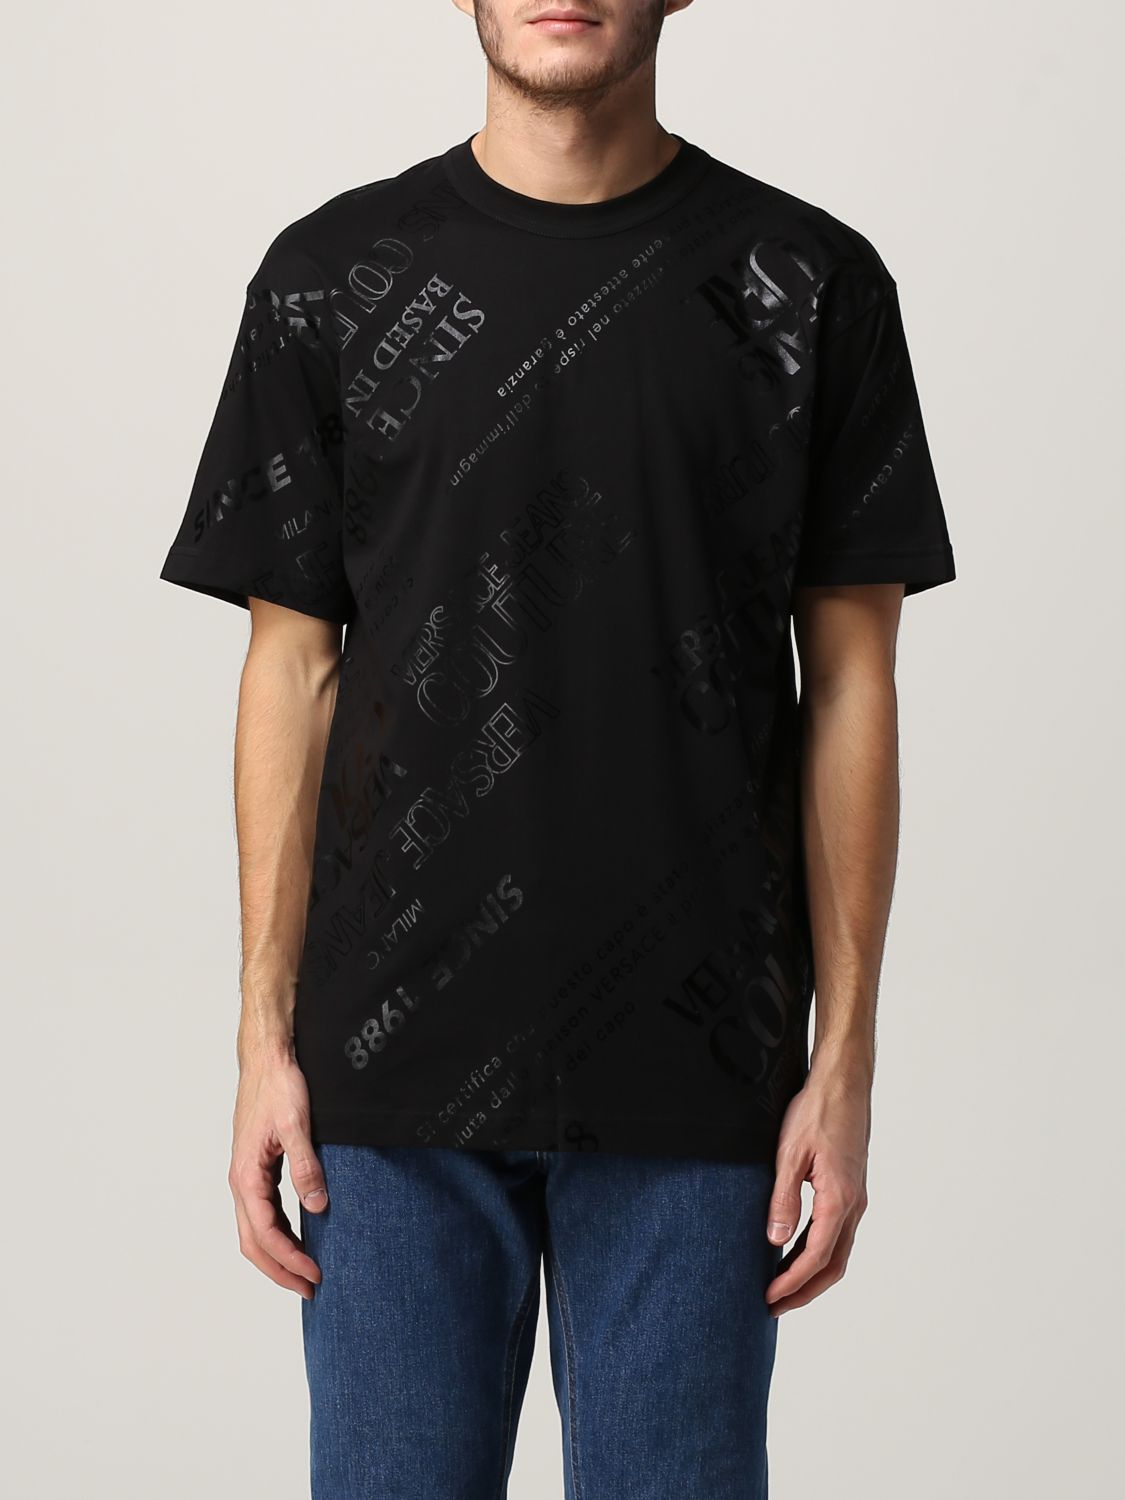 VERSACE JEANS COUTURE: T-shirt with all over prints - Black | Versace ...